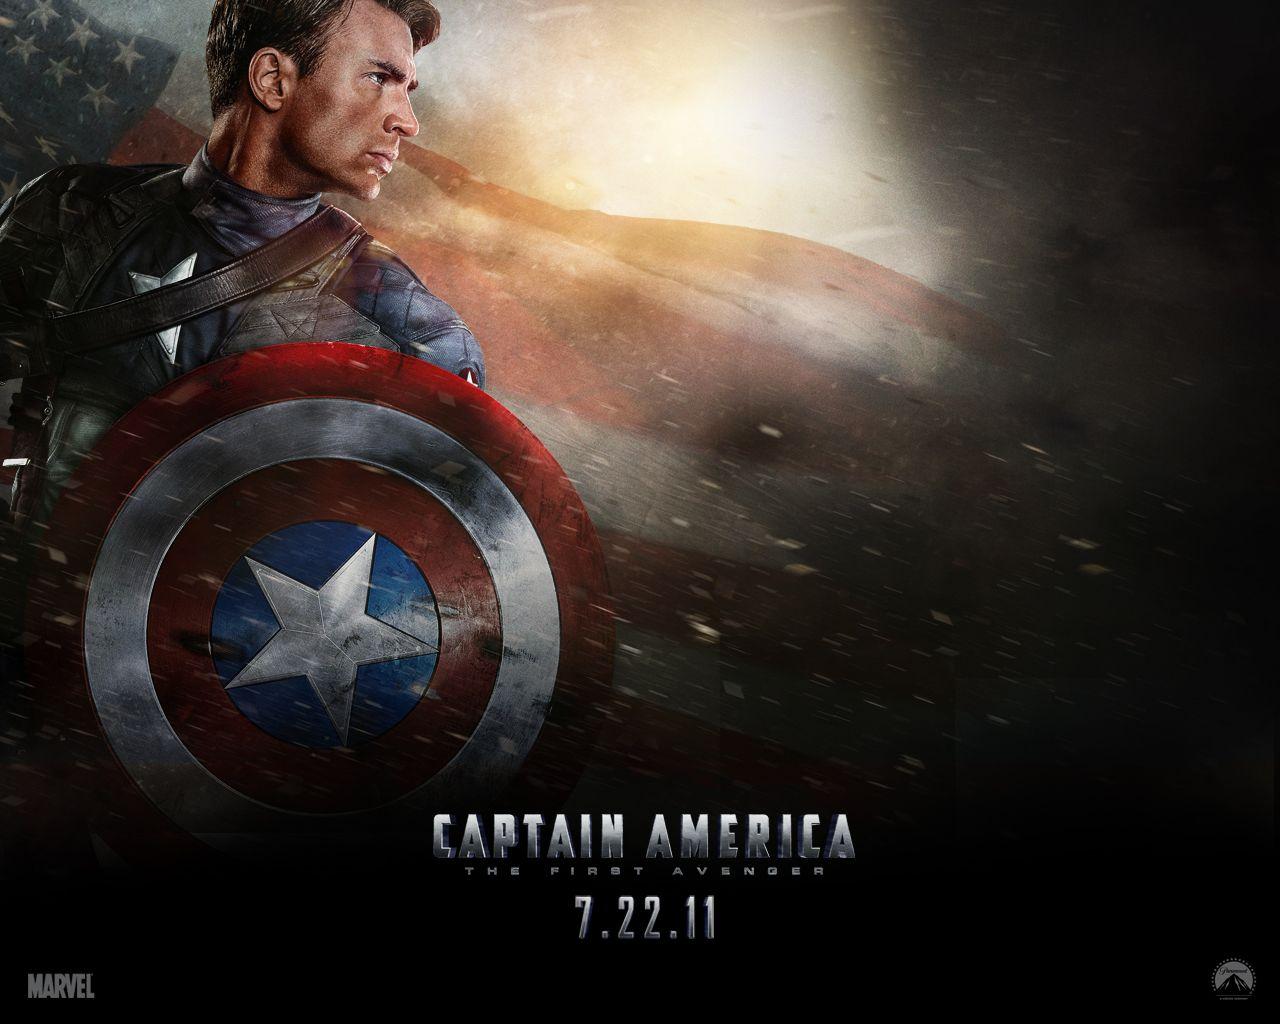 Wallpaper Captain America: The First Avenger Movies